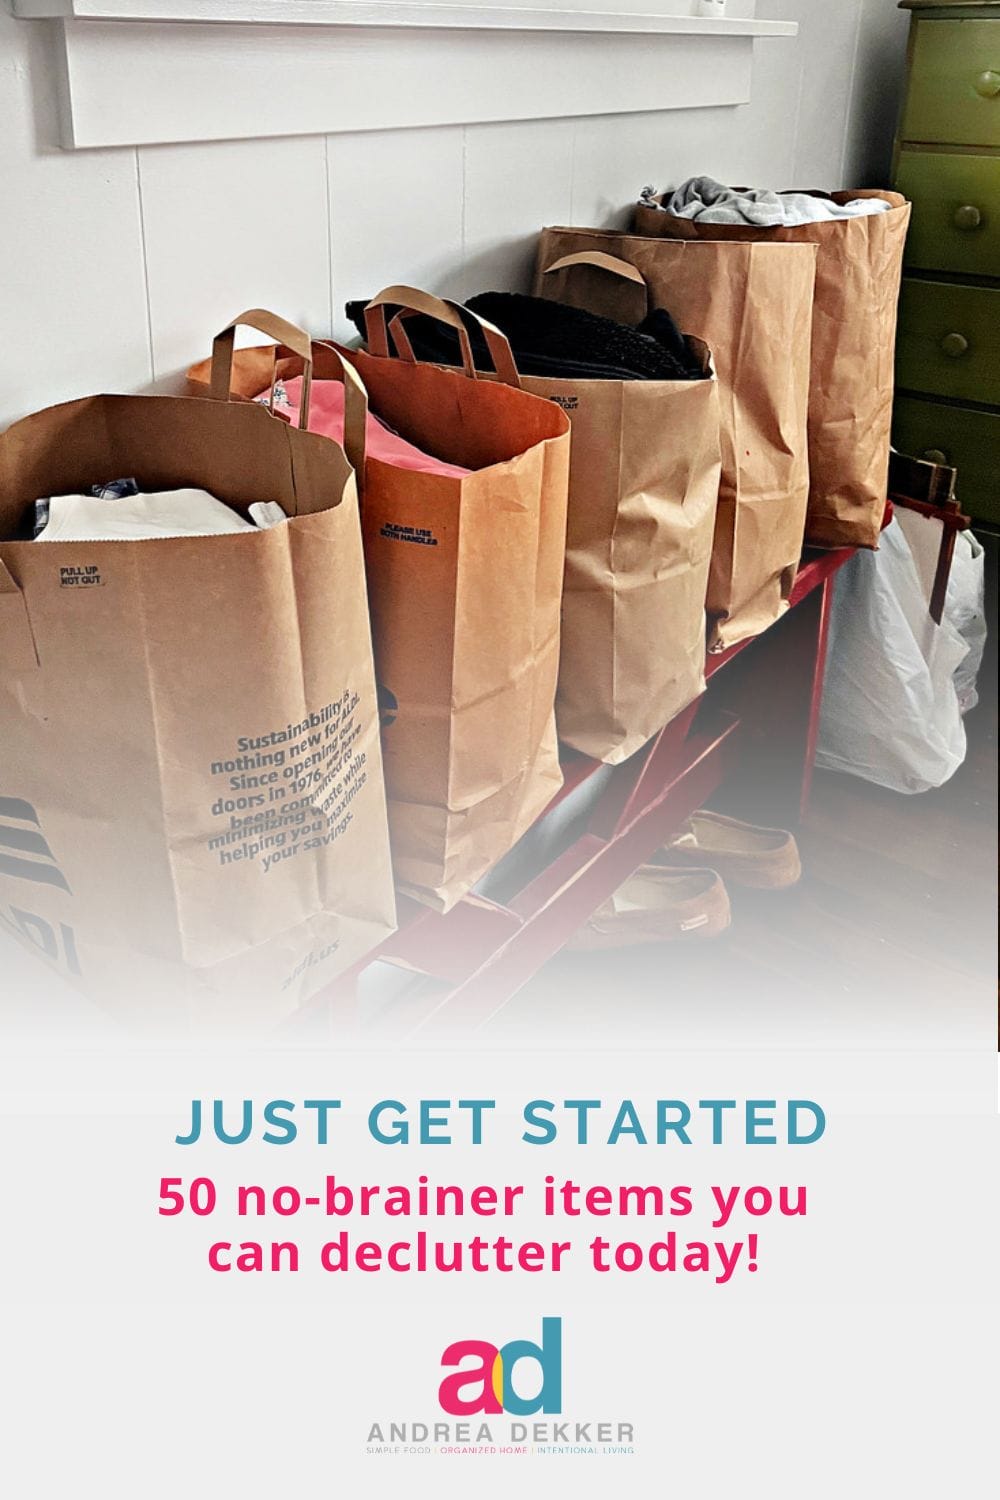 Tackling your next clutter hot spot can feel overwhelming… instead of dwelling on that feeling, take action by decluttering a few no-brainer items today and shift your momentum in the right direction! via @andreadekker